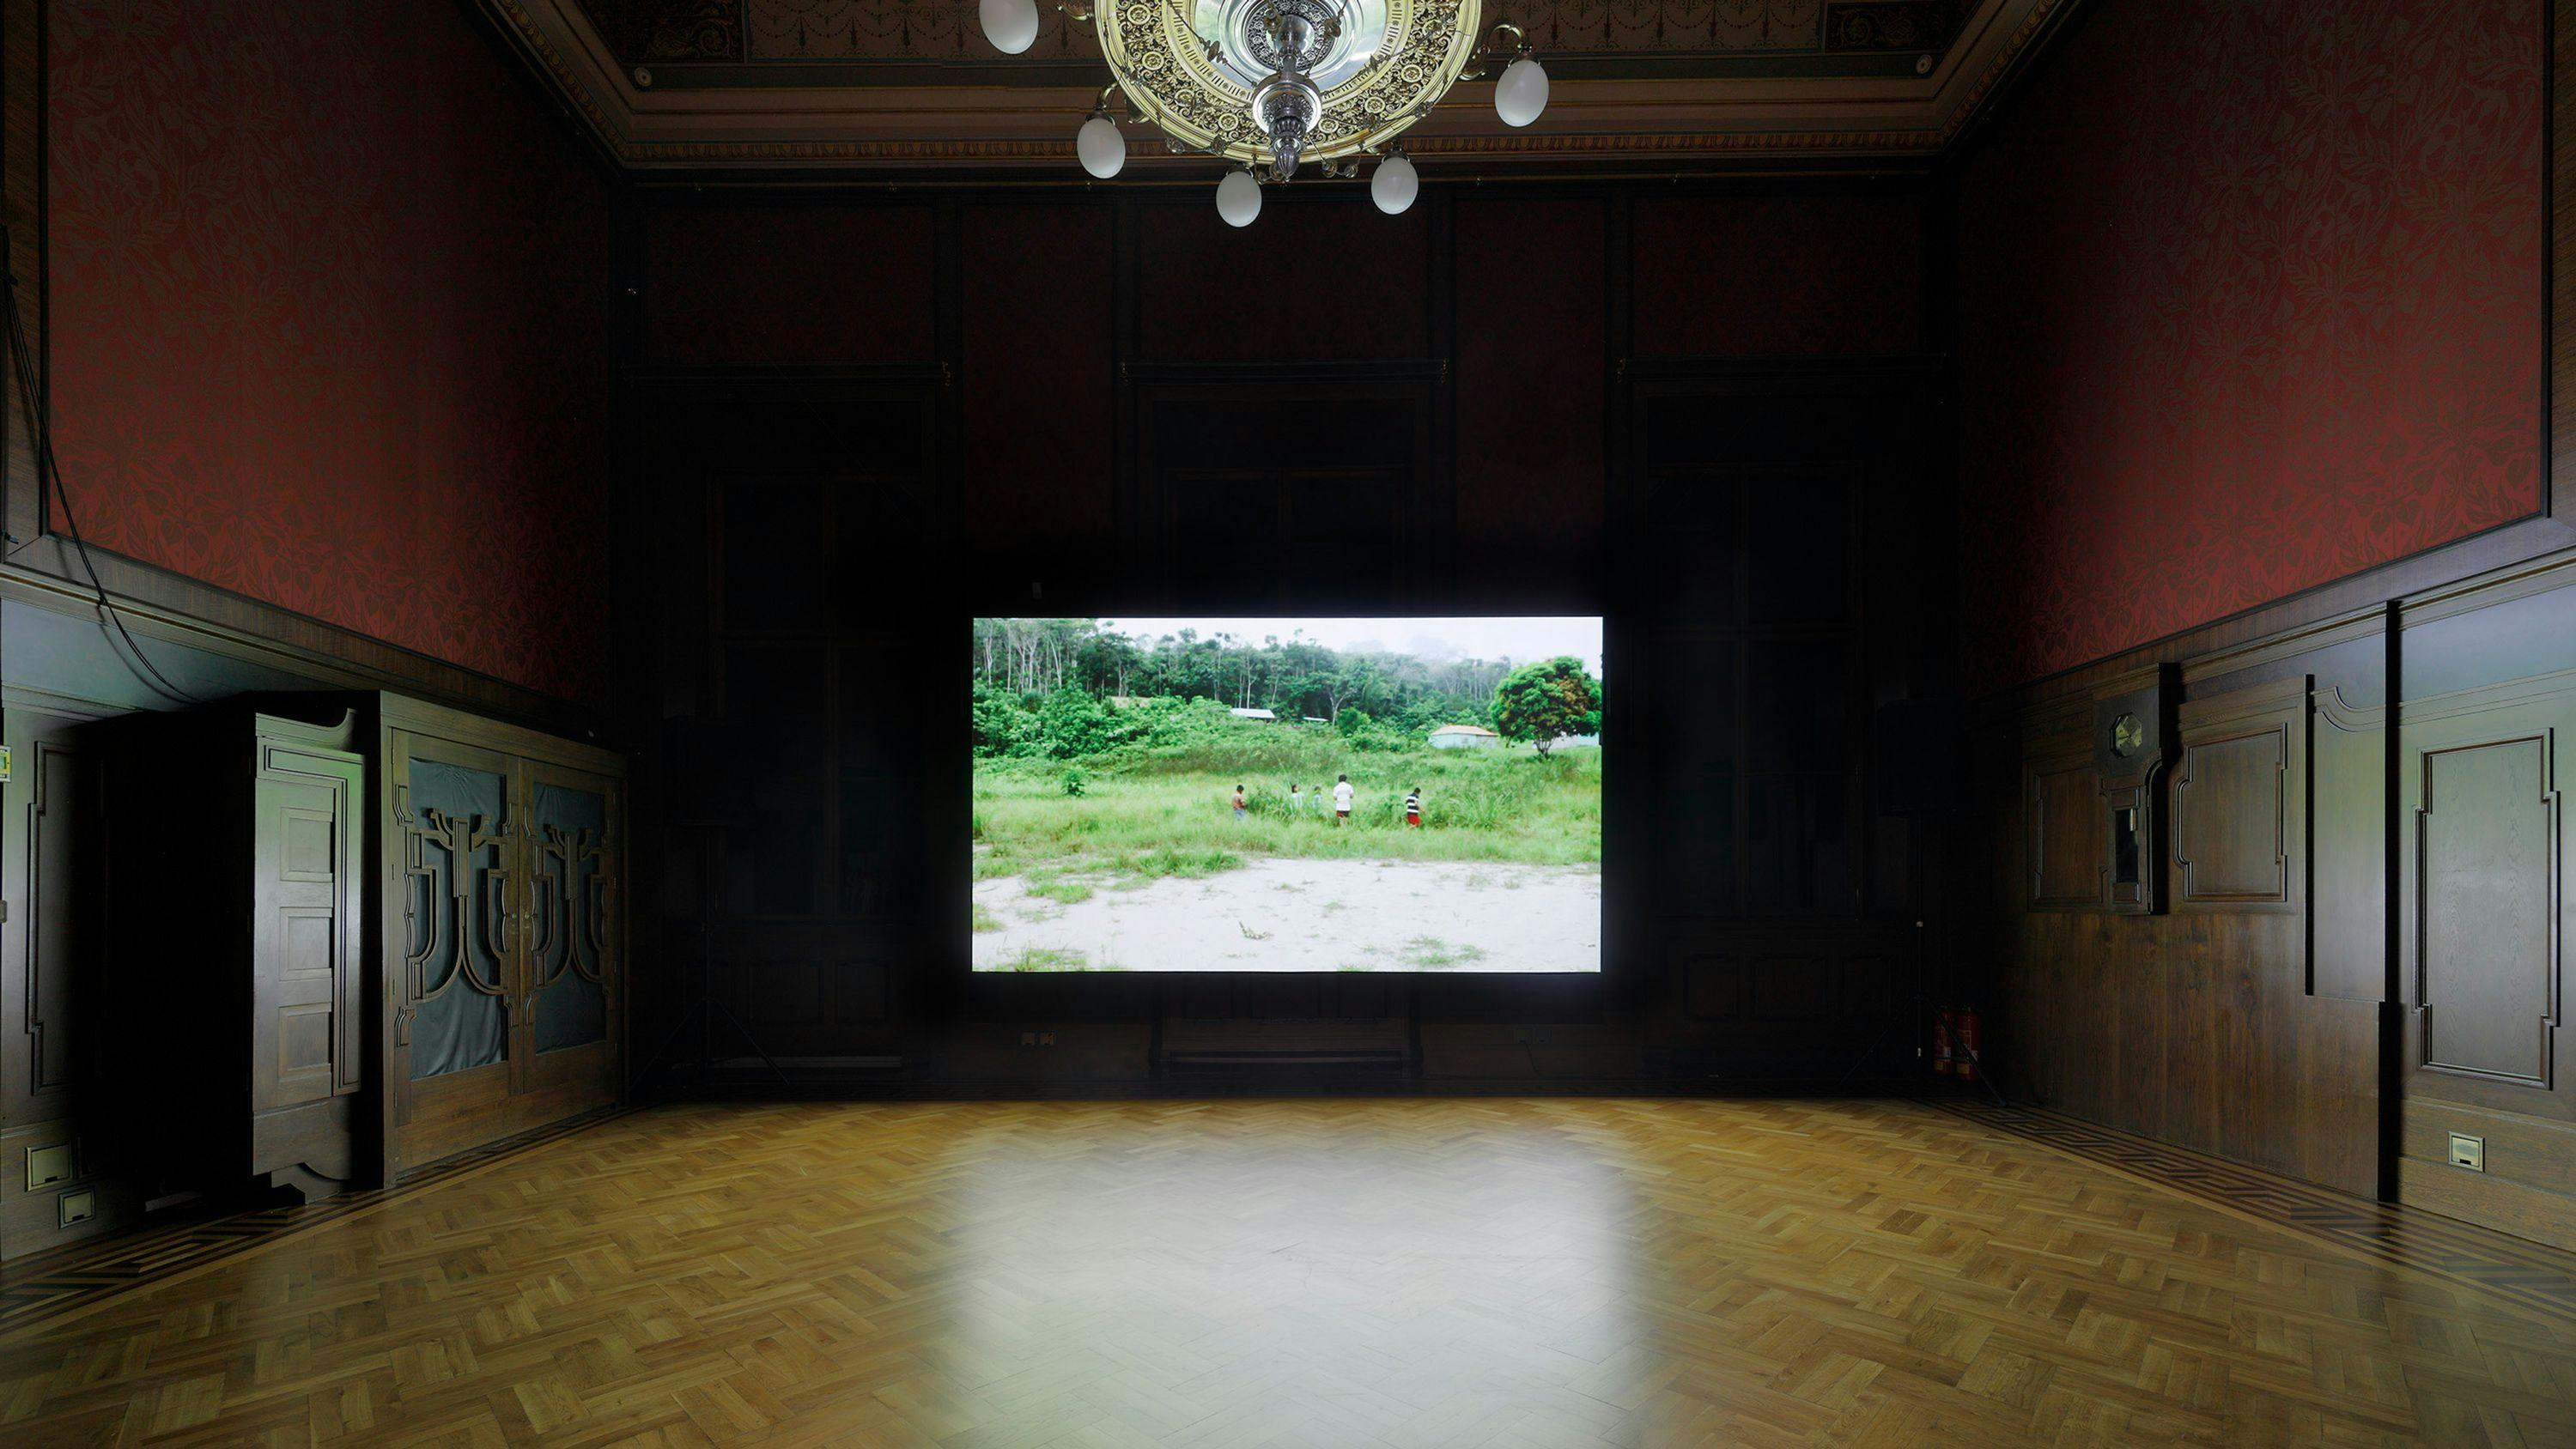 Installation view of Francis Alÿs’s work shown in fragilités, dated 2022–23